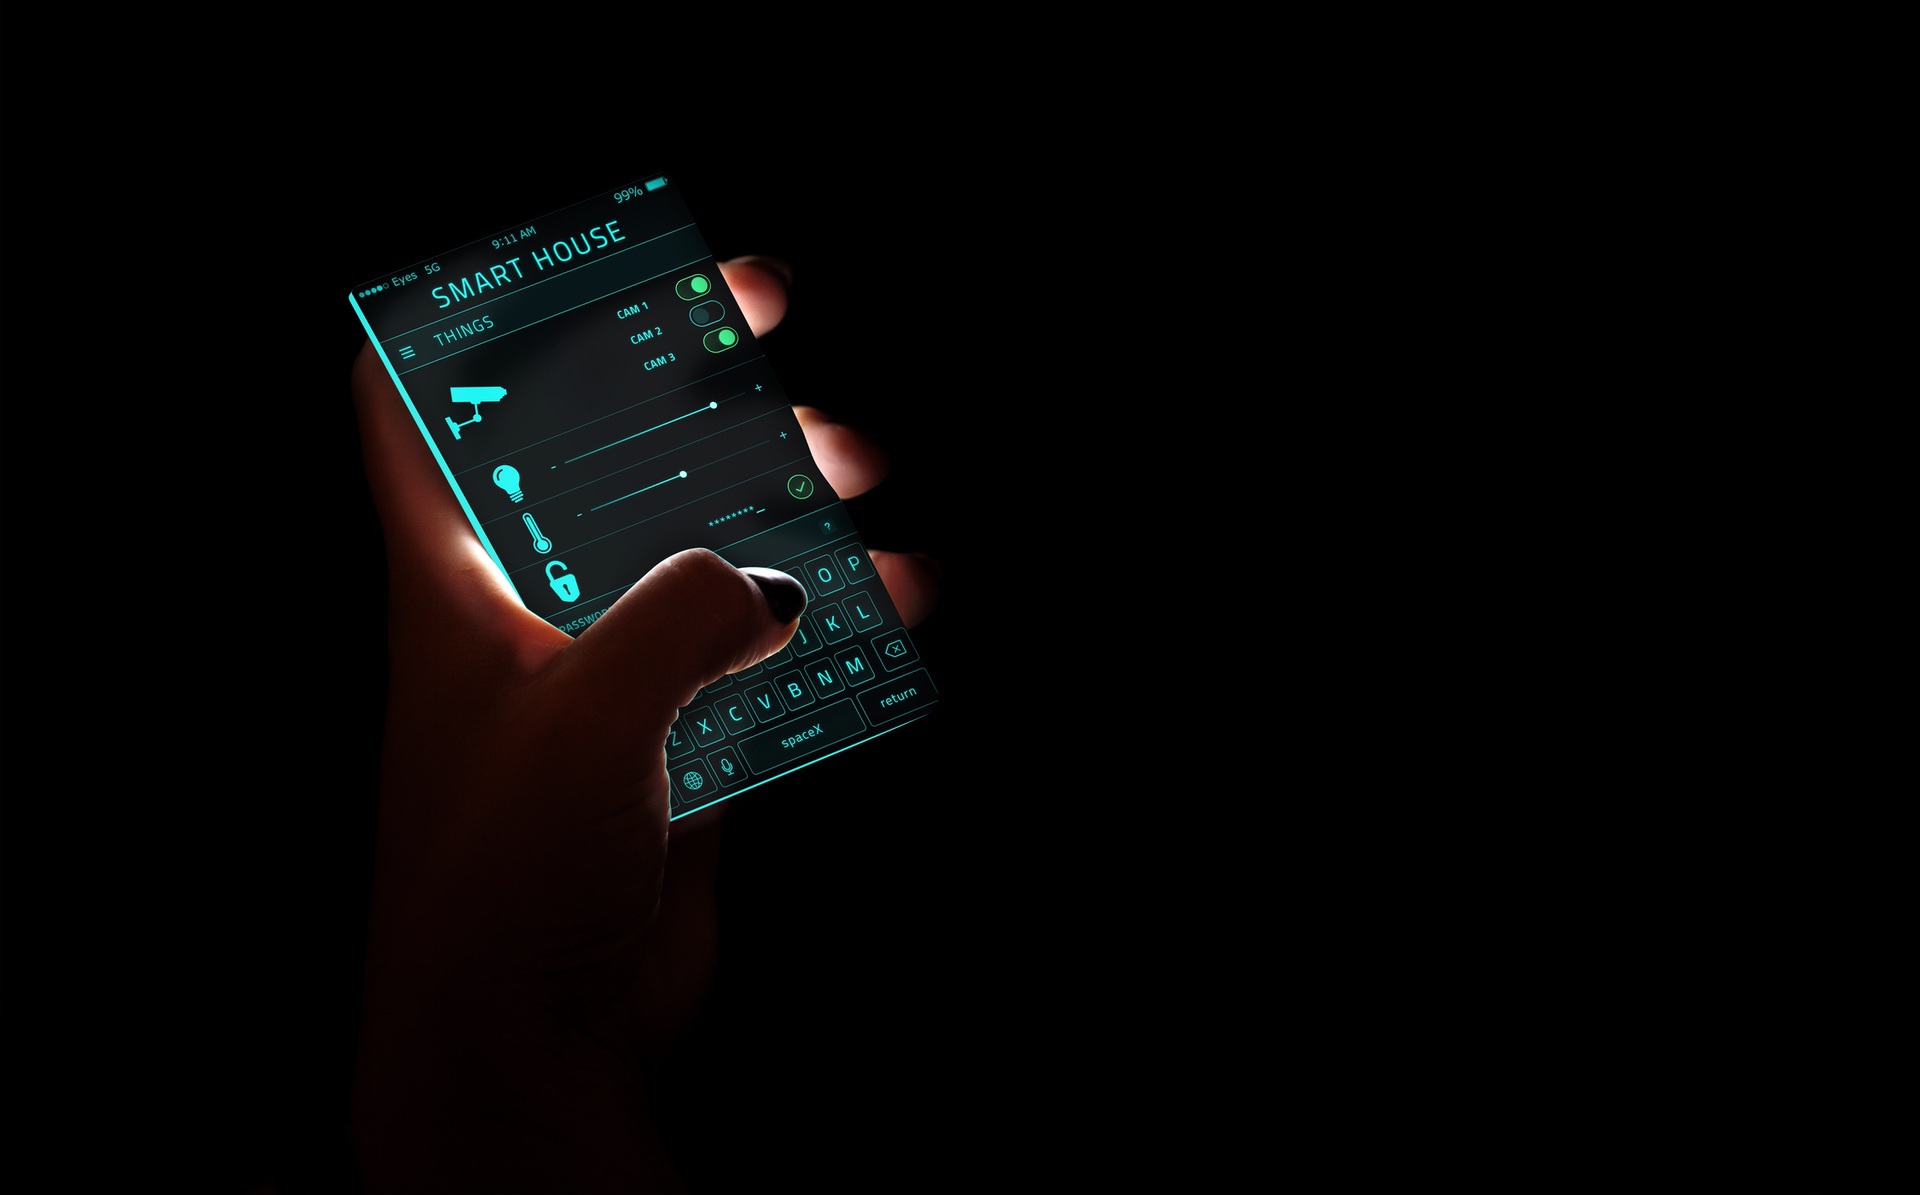 Hands operating smart thermostat on phone via app in the dark